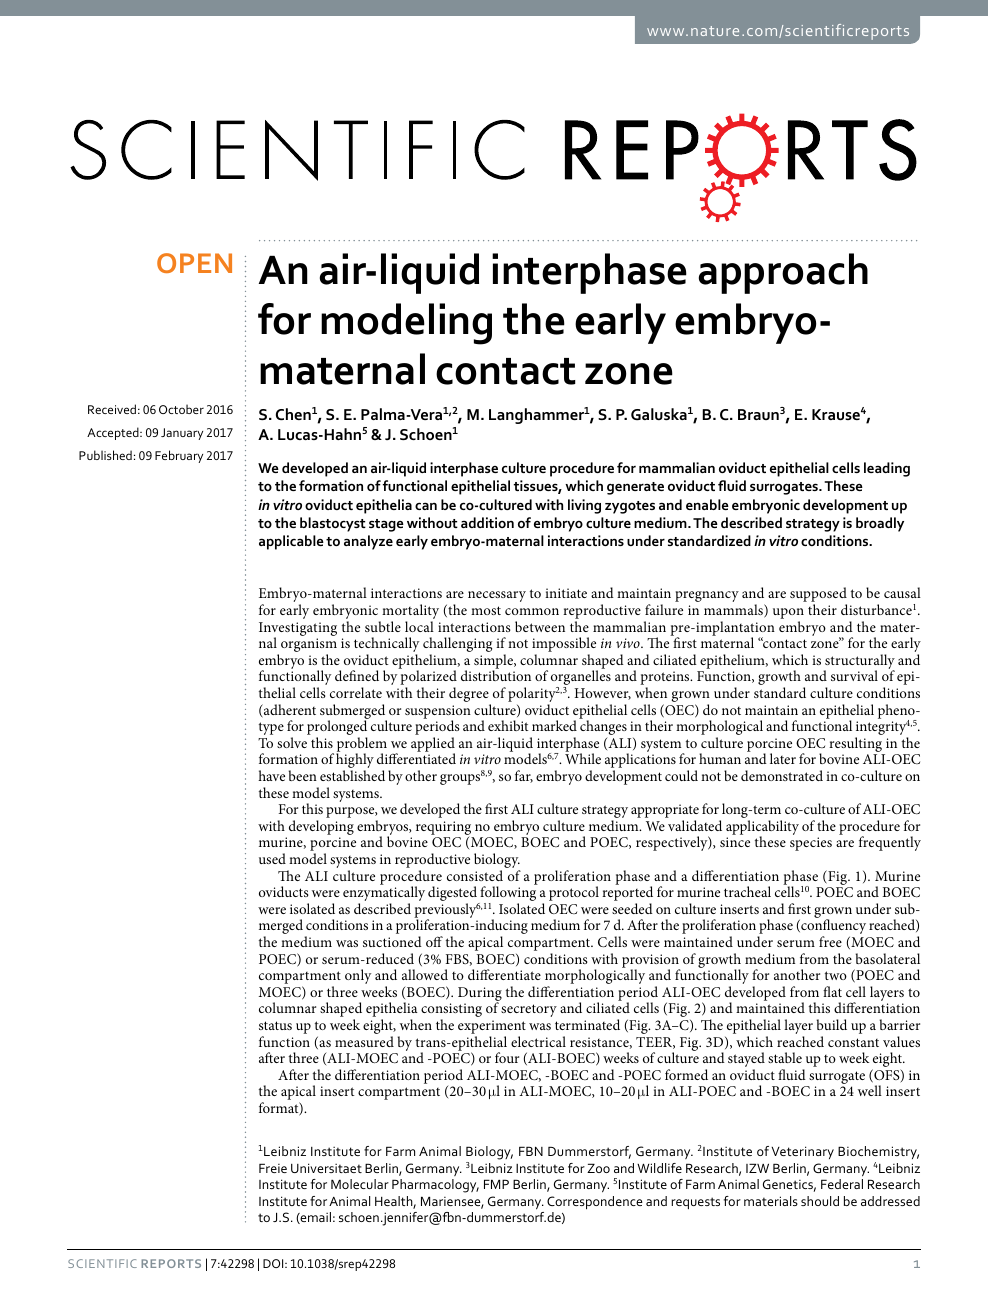 An Air Liquid Interphase Approach For Modeling The Early Embryo Maternal Contact Zone Topic Of Research Paper In Veterinary Science Download Scholarly Article Pdf And Read For Free On Cyberleninka Open Science Hub